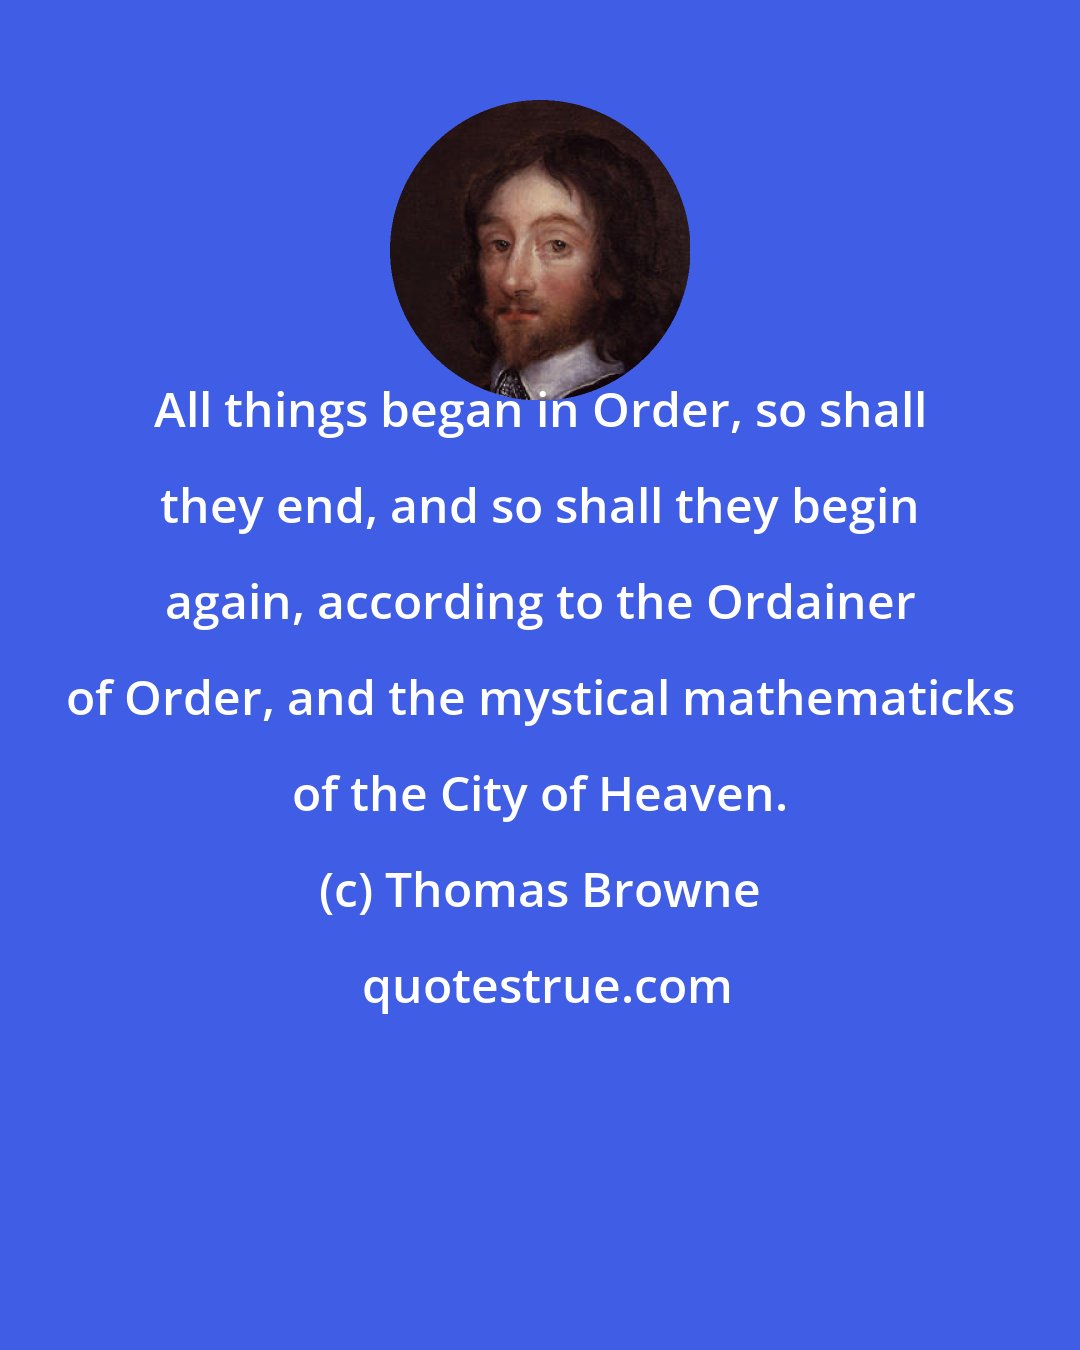 Thomas Browne: All things began in Order, so shall they end, and so shall they begin again, according to the Ordainer of Order, and the mystical mathematicks of the City of Heaven.